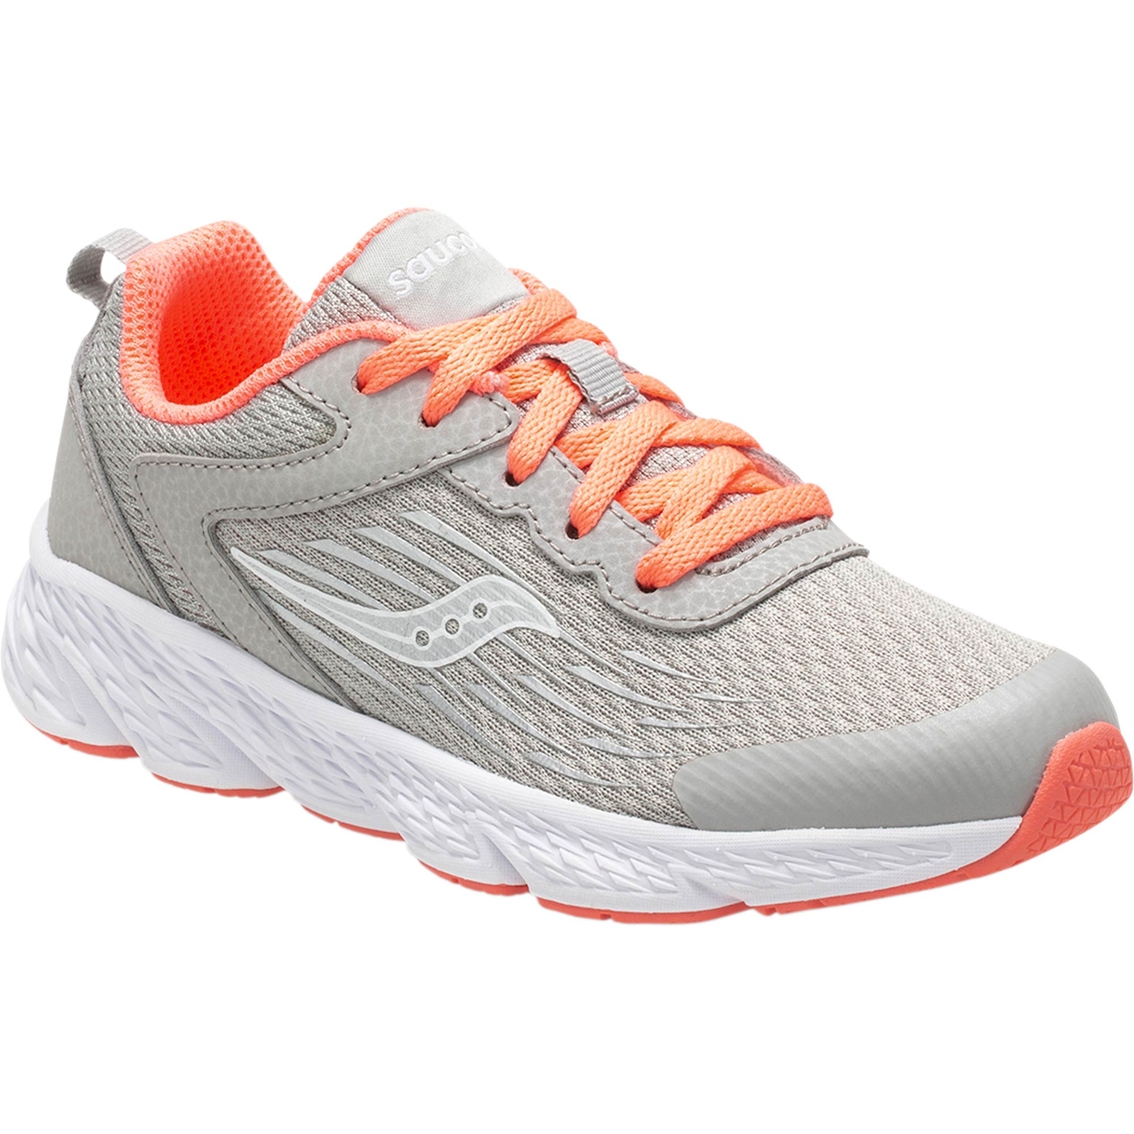 saucony shoes for girls